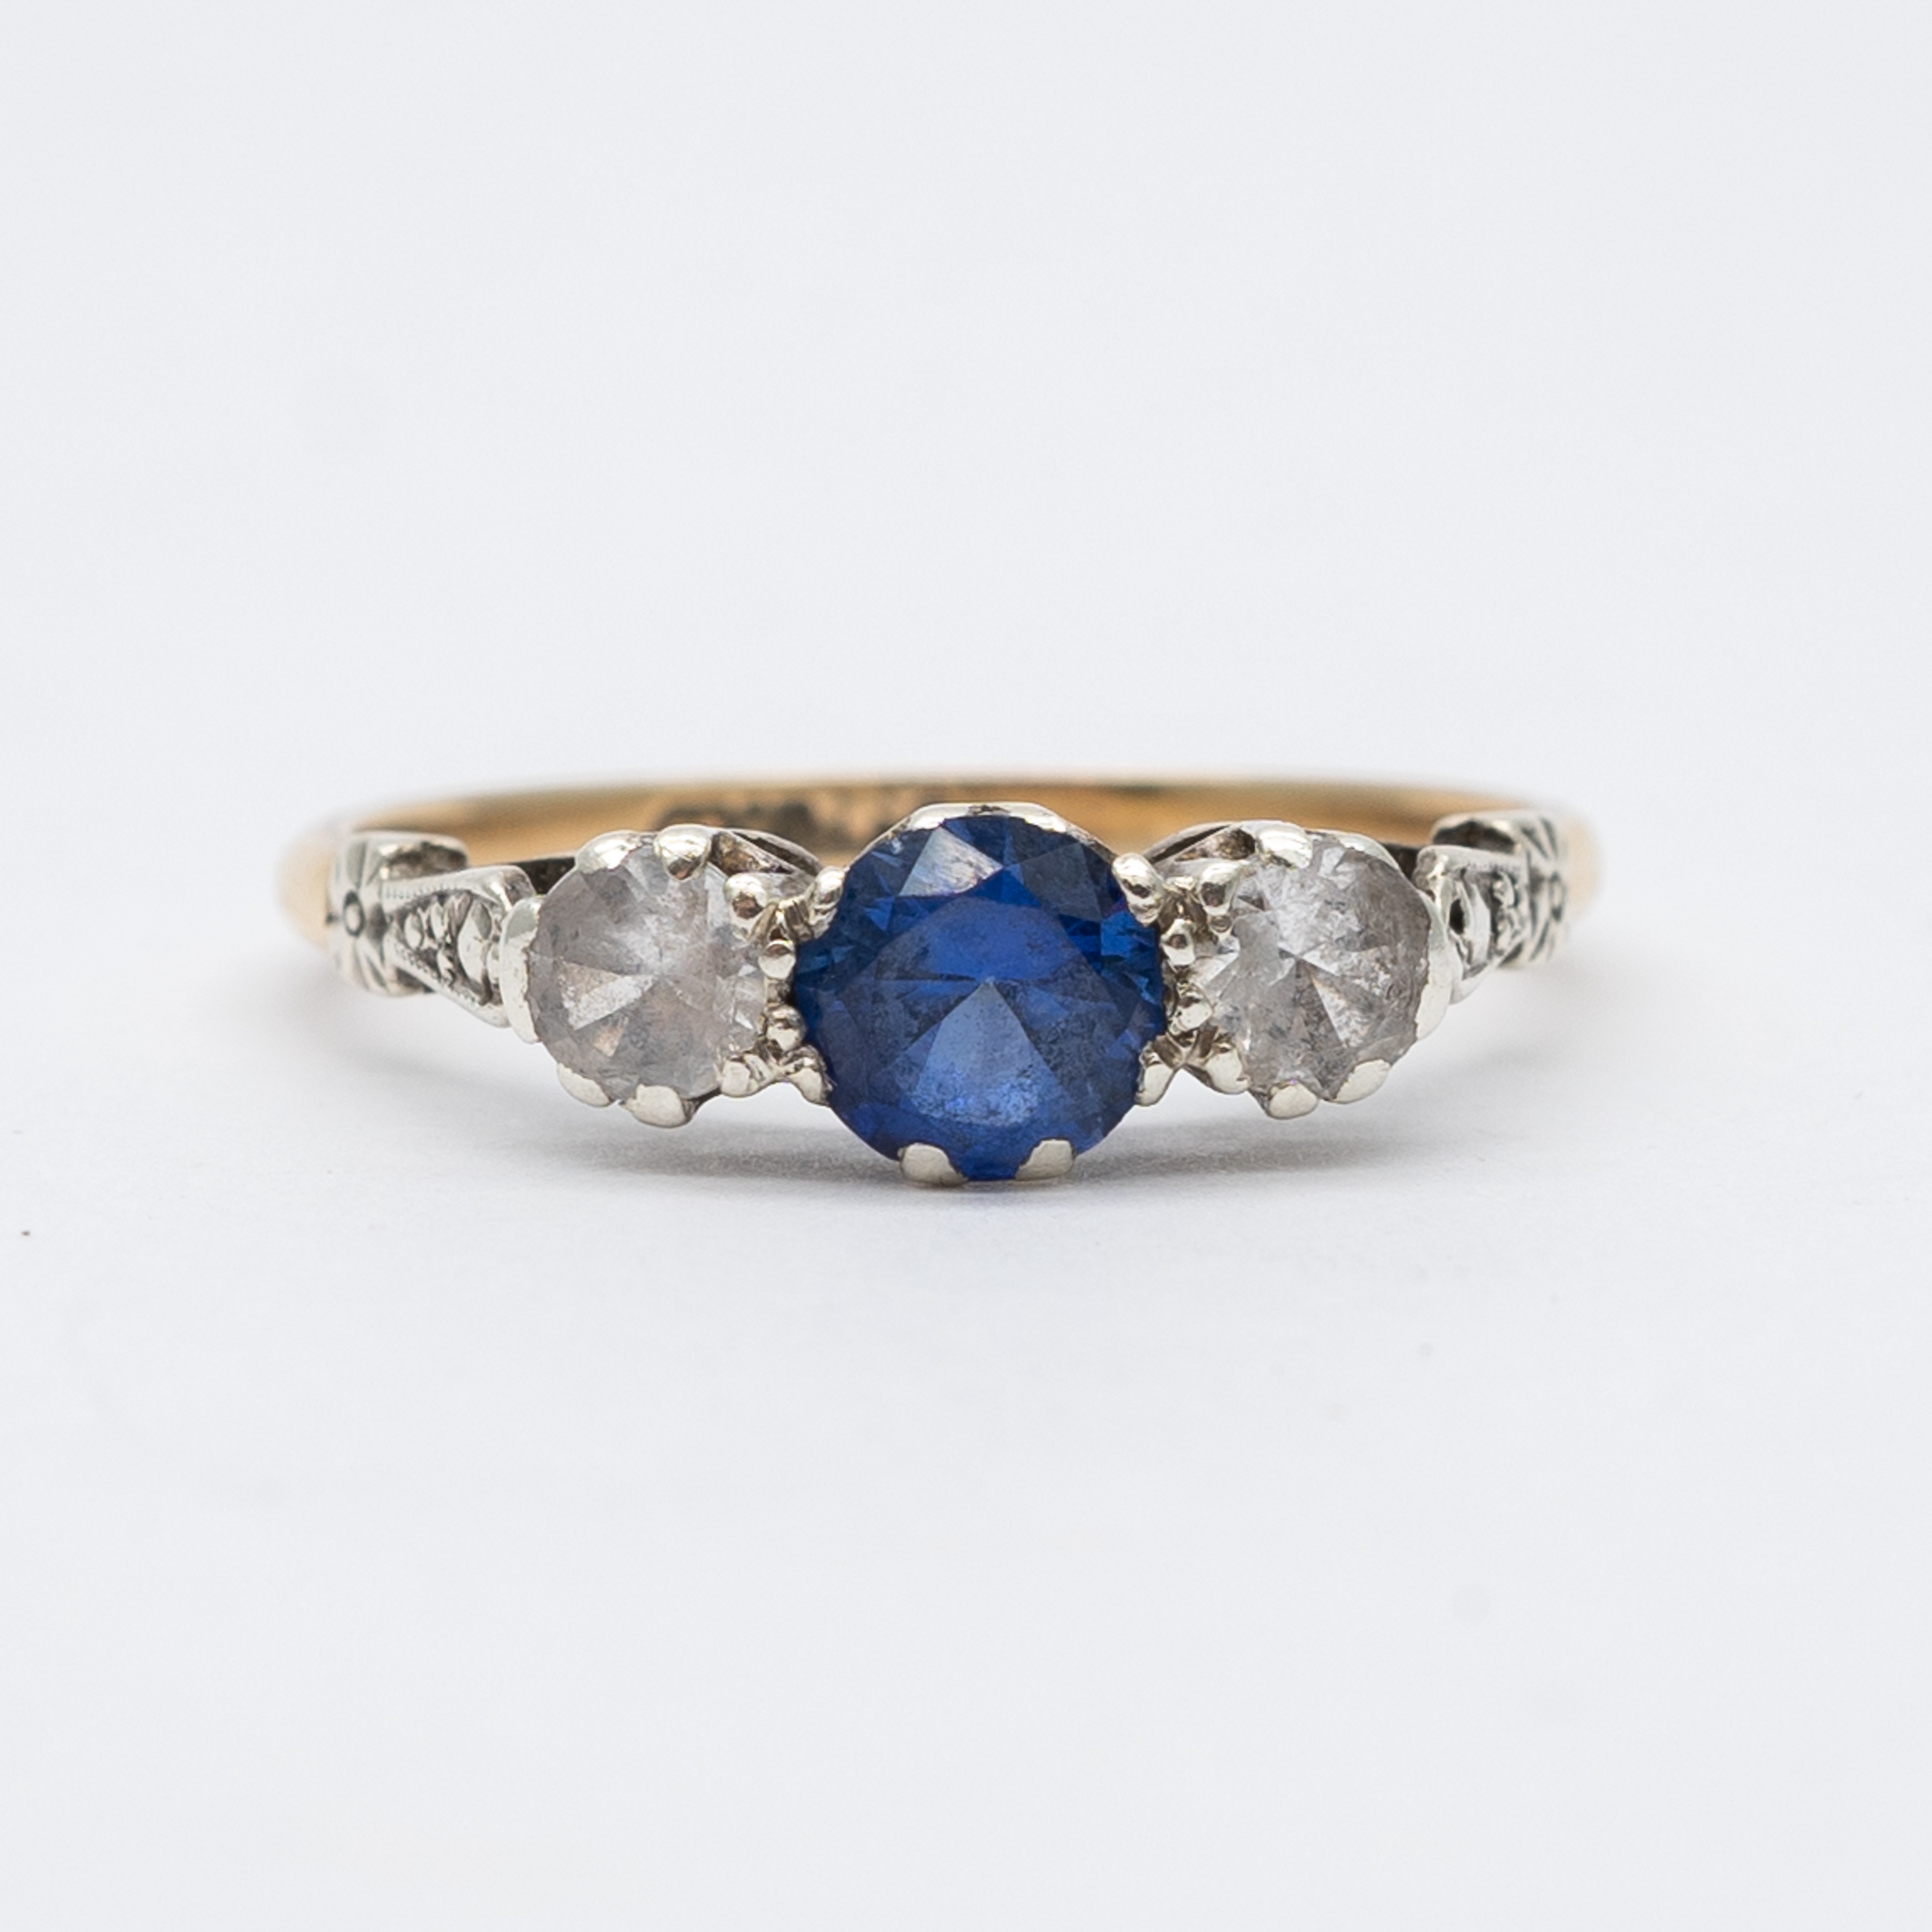 A 9ct yellow gold cz blue stone ring